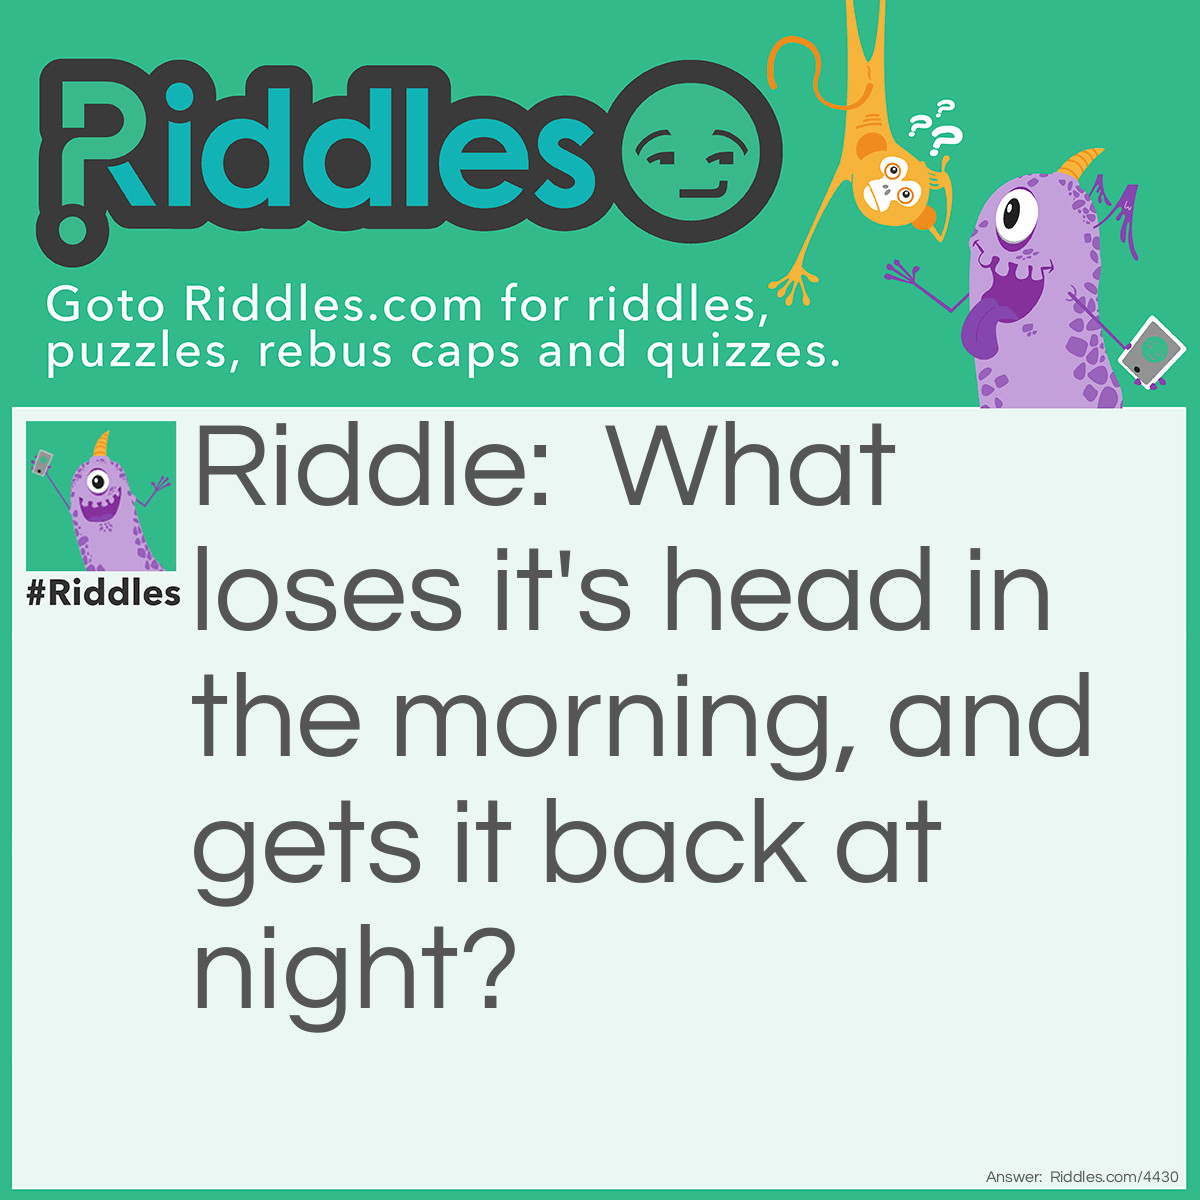 Riddle: What loses it's head in the morning, and gets it back at night? Answer: A Pillow.